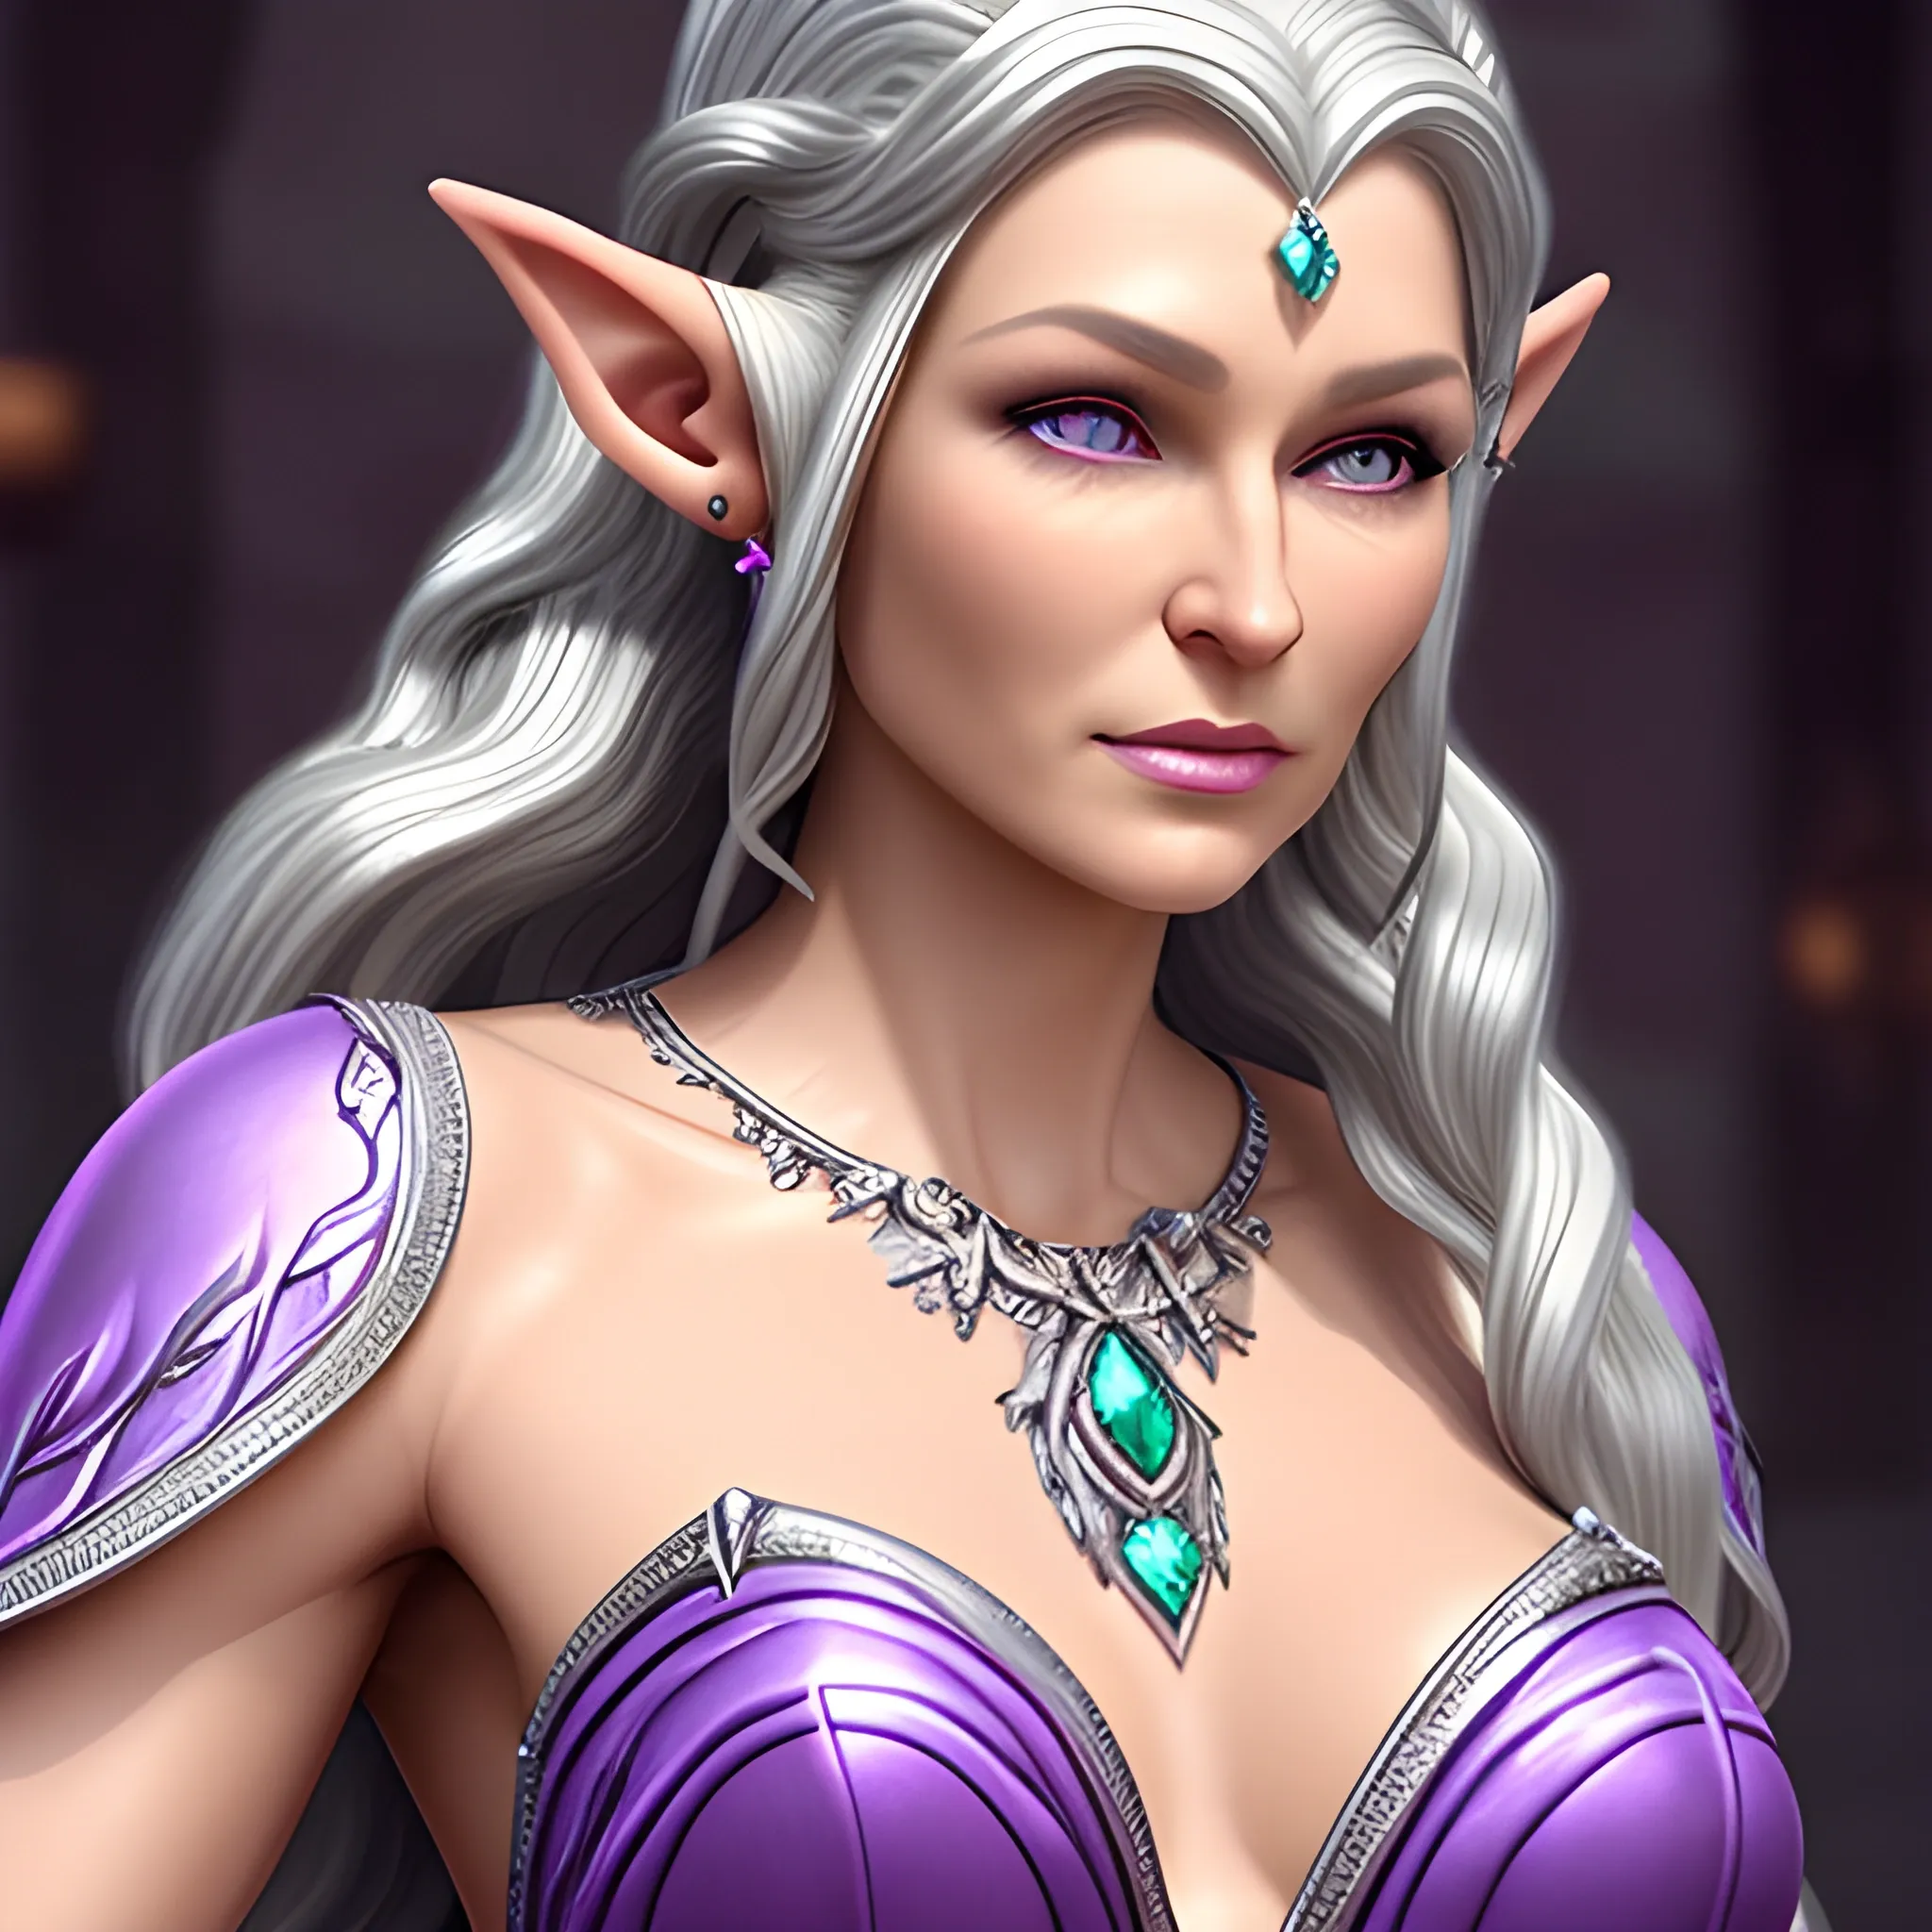 realistic slightly older female elf with long curling silver hair and purple eyes. Jeweled ears and body. Dewy skin, soft features. Queen bejeweled